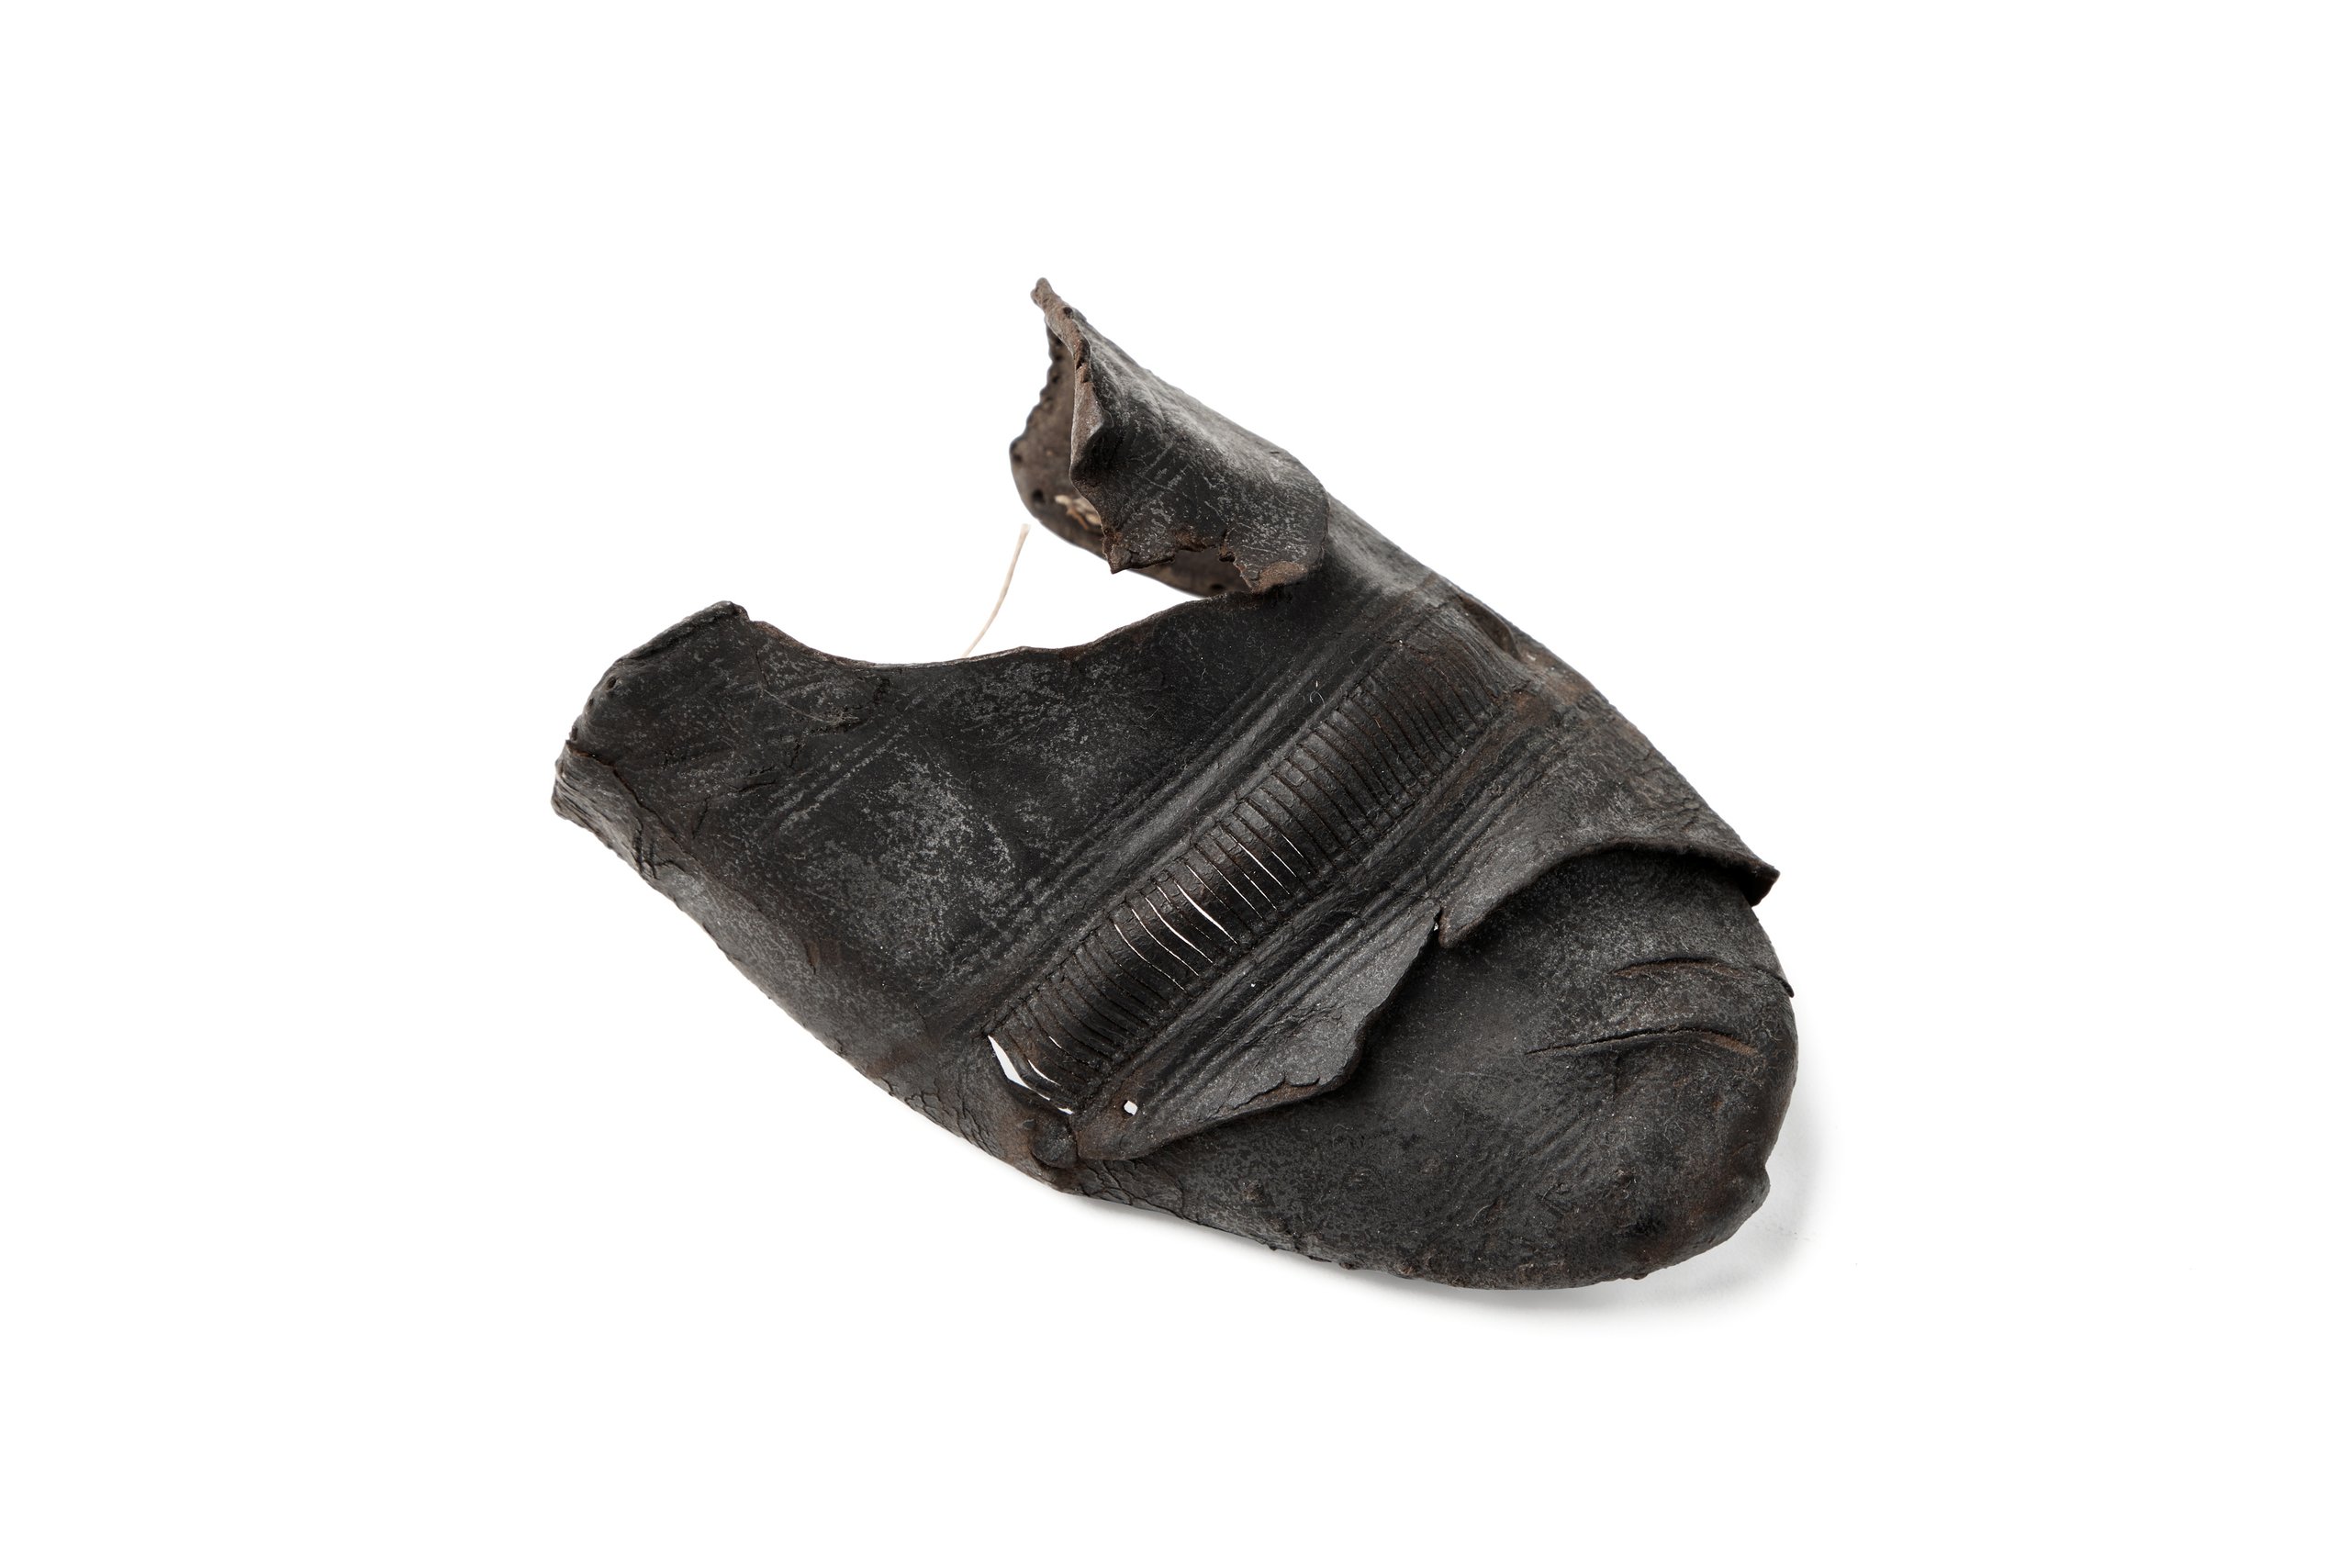 Shoe vamp fragment from the Joseph Box collection